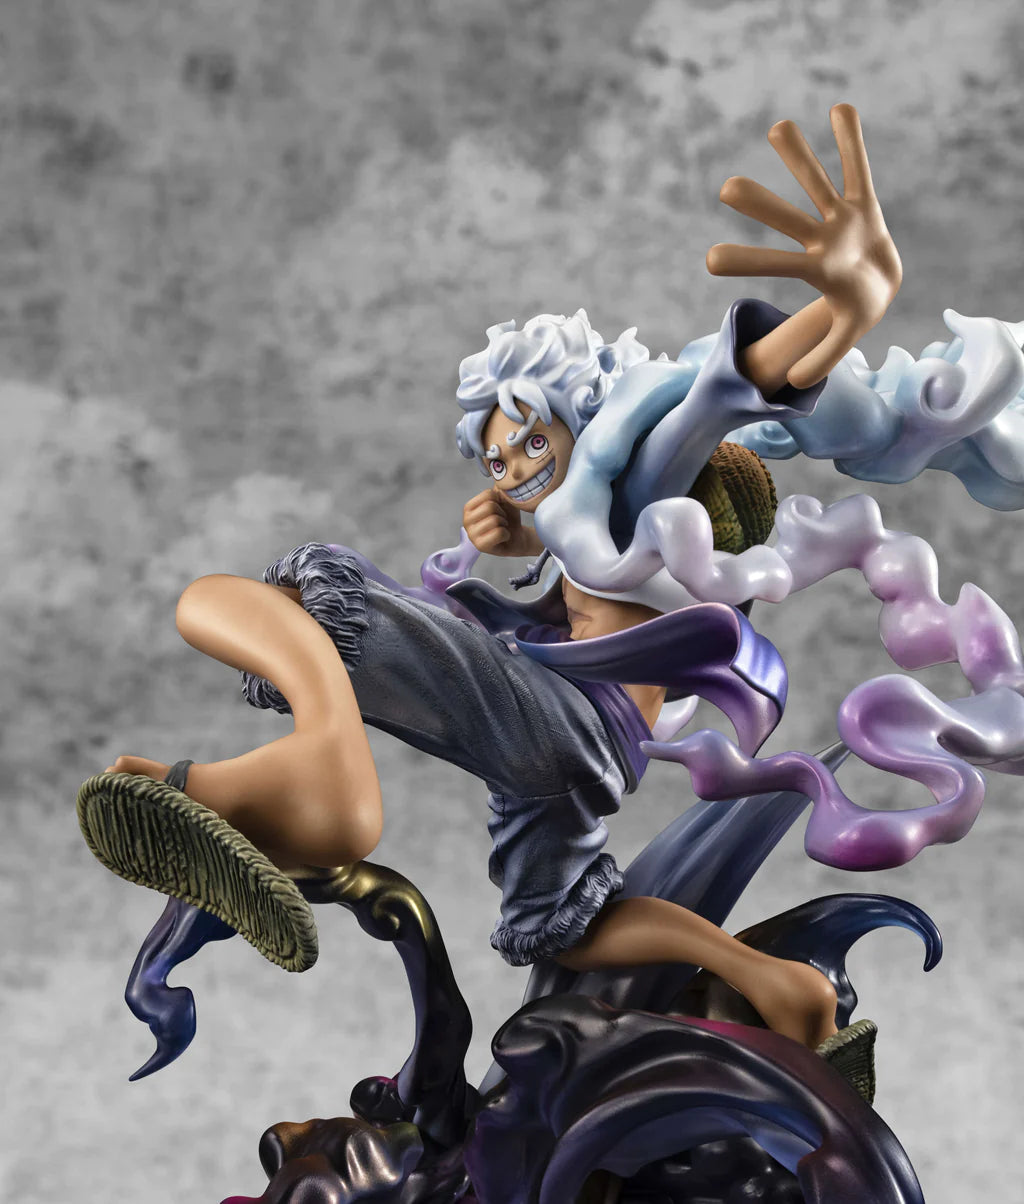 One Piece - Monkey D. Luffy - Portrait Of Pirates "WA-MAXIMUM" - Gear 5 (MegaHouse), Franchise: One Piece, Brand: MegaHouse, Release Date: 31. Jul 2024, Dimensions: W=220mm (8.58in) L=245mm (9.56in) H=230mm (8.97in), Nippon Figures